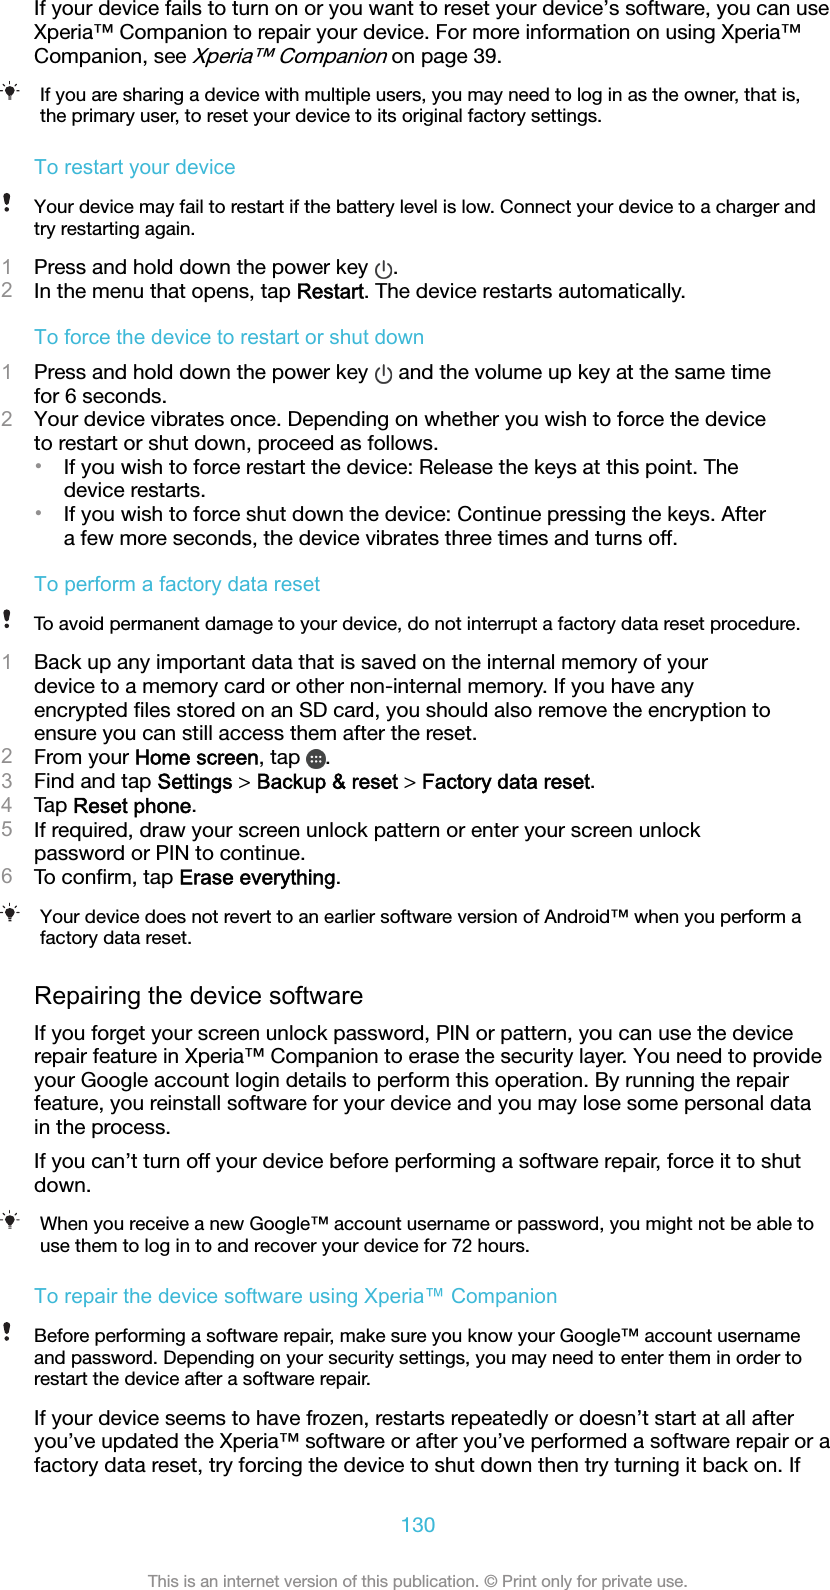 If your device fails to turn on or you want to reset your device’s software, you can useXperia™ Companion to repair your device. For more information on using Xperia™Companion, see Xperia™ Companion on page 39.If you are sharing a device with multiple users, you may need to log in as the owner, that is,the primary user, to reset your device to its original factory settings.To restart your deviceYour device may fail to restart if the battery level is low. Connect your device to a charger andtry restarting again.1Press and hold down the power key  .2In the menu that opens, tap Restart. The device restarts automatically.To force the device to restart or shut down1Press and hold down the power key   and the volume up key at the same timefor 6 seconds.2Your device vibrates once. Depending on whether you wish to force the deviceto restart or shut down, proceed as follows.•If you wish to force restart the device: Release the keys at this point. Thedevice restarts.•If you wish to force shut down the device: Continue pressing the keys. Aftera few more seconds, the device vibrates three times and turns off.To perform a factory data resetTo avoid permanent damage to your device, do not interrupt a factory data reset procedure.1Back up any important data that is saved on the internal memory of yourdevice to a memory card or other non-internal memory. If you have anyencrypted ﬁles stored on an SD card, you should also remove the encryption toensure you can still access them after the reset.2From your Home screen, tap  .3Find and tap Settings &gt; Backup &amp; reset &gt; Factory data reset.4Tap Reset phone.5If required, draw your screen unlock pattern or enter your screen unlockpassword or PIN to continue.6To conﬁrm, tap Erase everything.Your device does not revert to an earlier software version of Android™ when you perform afactory data reset.Repairing the device softwareIf you forget your screen unlock password, PIN or pattern, you can use the devicerepair feature in Xperia™ Companion to erase the security layer. You need to provideyour Google account login details to perform this operation. By running the repairfeature, you reinstall software for your device and you may lose some personal datain the process.If you can’t turn off your device before performing a software repair, force it to shutdown.When you receive a new Google™ account username or password, you might not be able touse them to log in to and recover your device for 72 hours.To repair the device software using Xperia™ CompanionBefore performing a software repair, make sure you know your Google™ account usernameand password. Depending on your security settings, you may need to enter them in order torestart the device after a software repair.If your device seems to have frozen, restarts repeatedly or doesn’t start at all afteryou’ve updated the Xperia™ software or after you’ve performed a software repair or afactory data reset, try forcing the device to shut down then try turning it back on. If130This is an internet version of this publication. © Print only for private use.